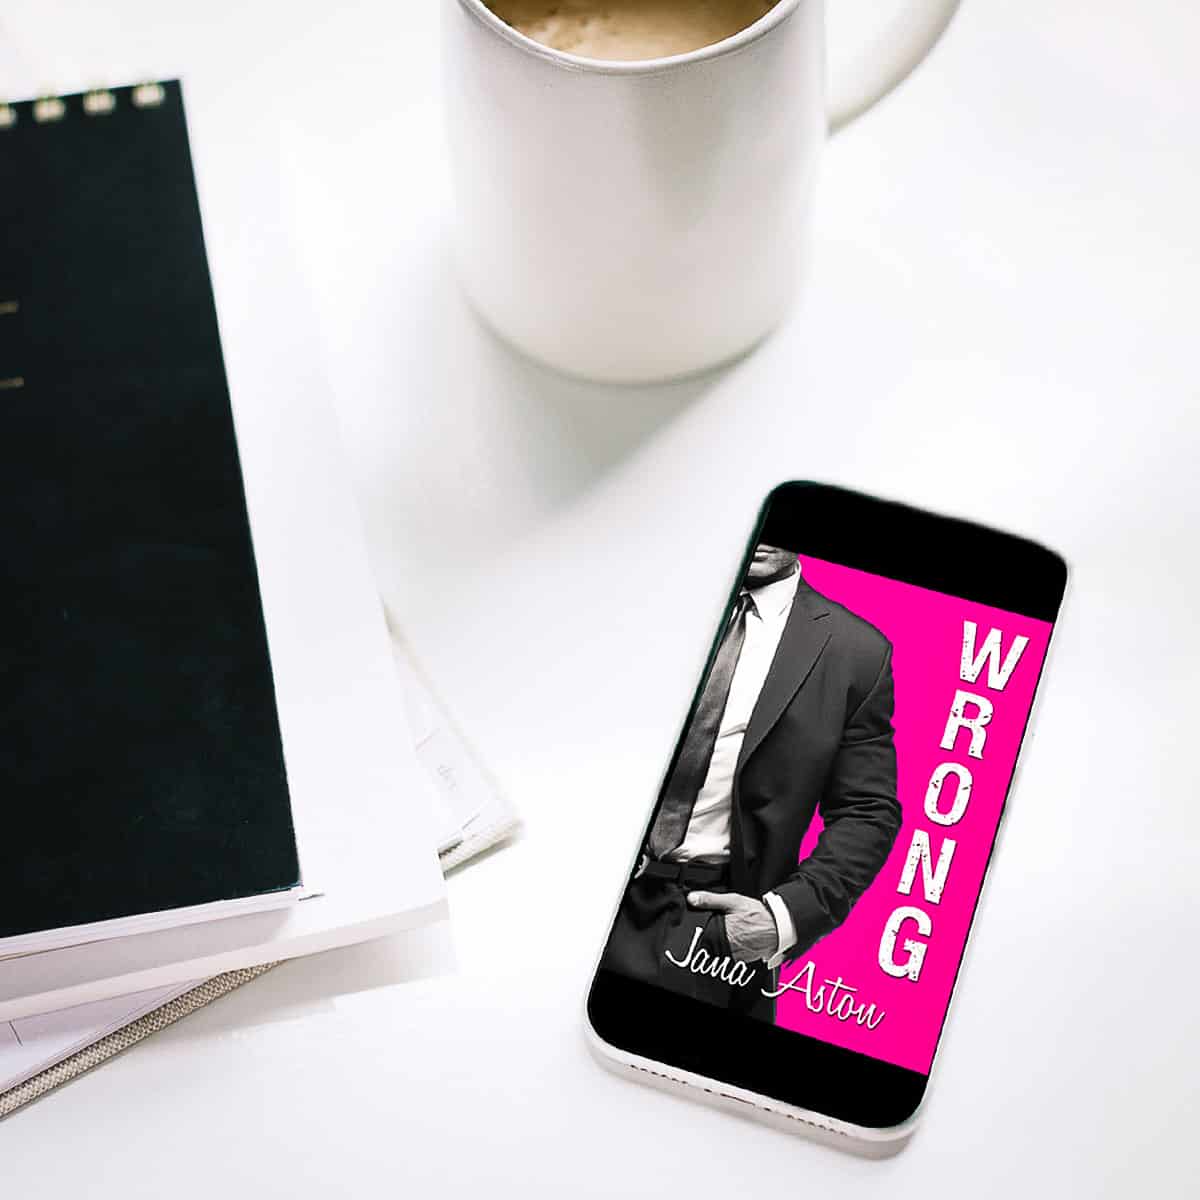 Wrong by Jana Aston, the first book in the Cafe series, is a romantic comedy featuring a love story between a college student and her gynecologist. Enjoy an excerpt and grab a copy!